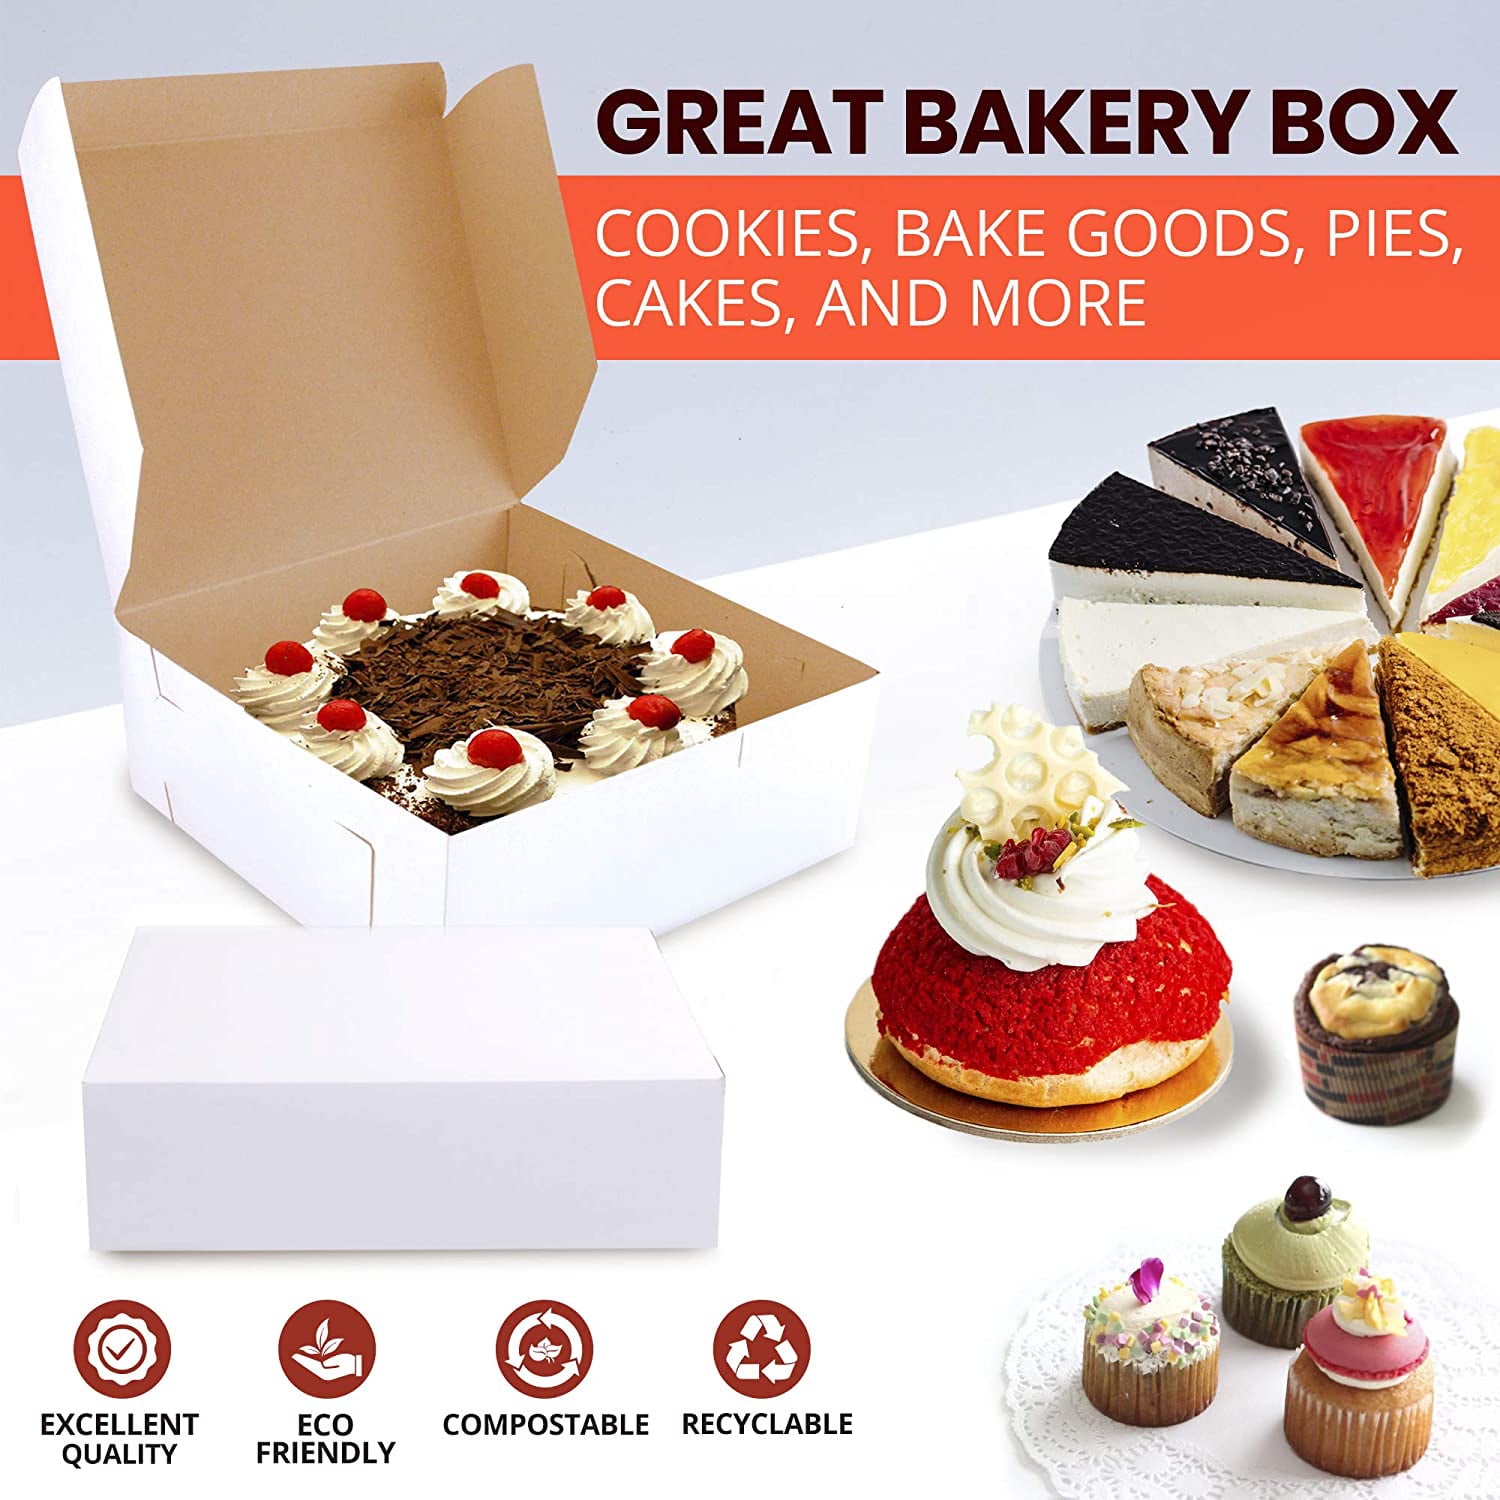 Internet Bakery Suppliers of Cake Paper Goods - Pastries Like a Pro